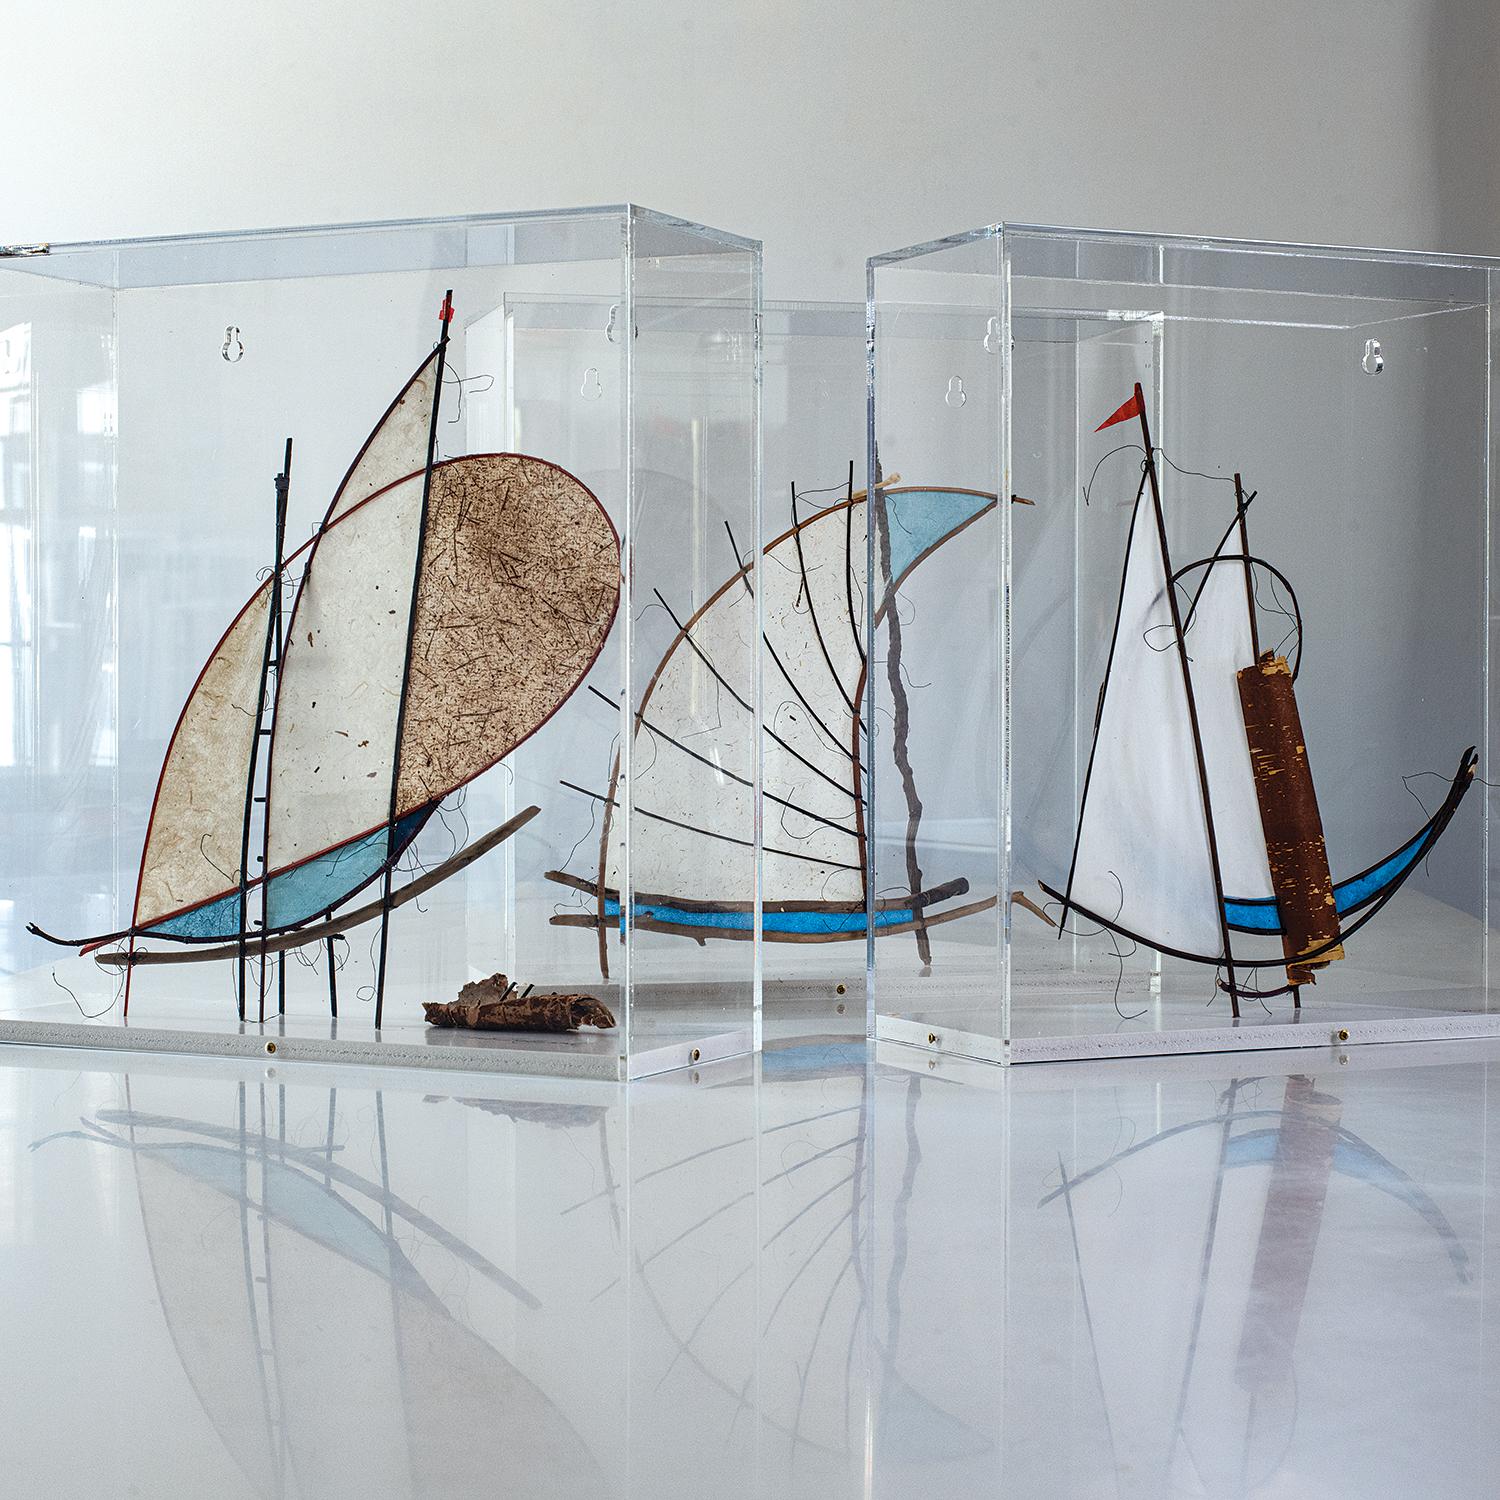 reed and paper sculptures